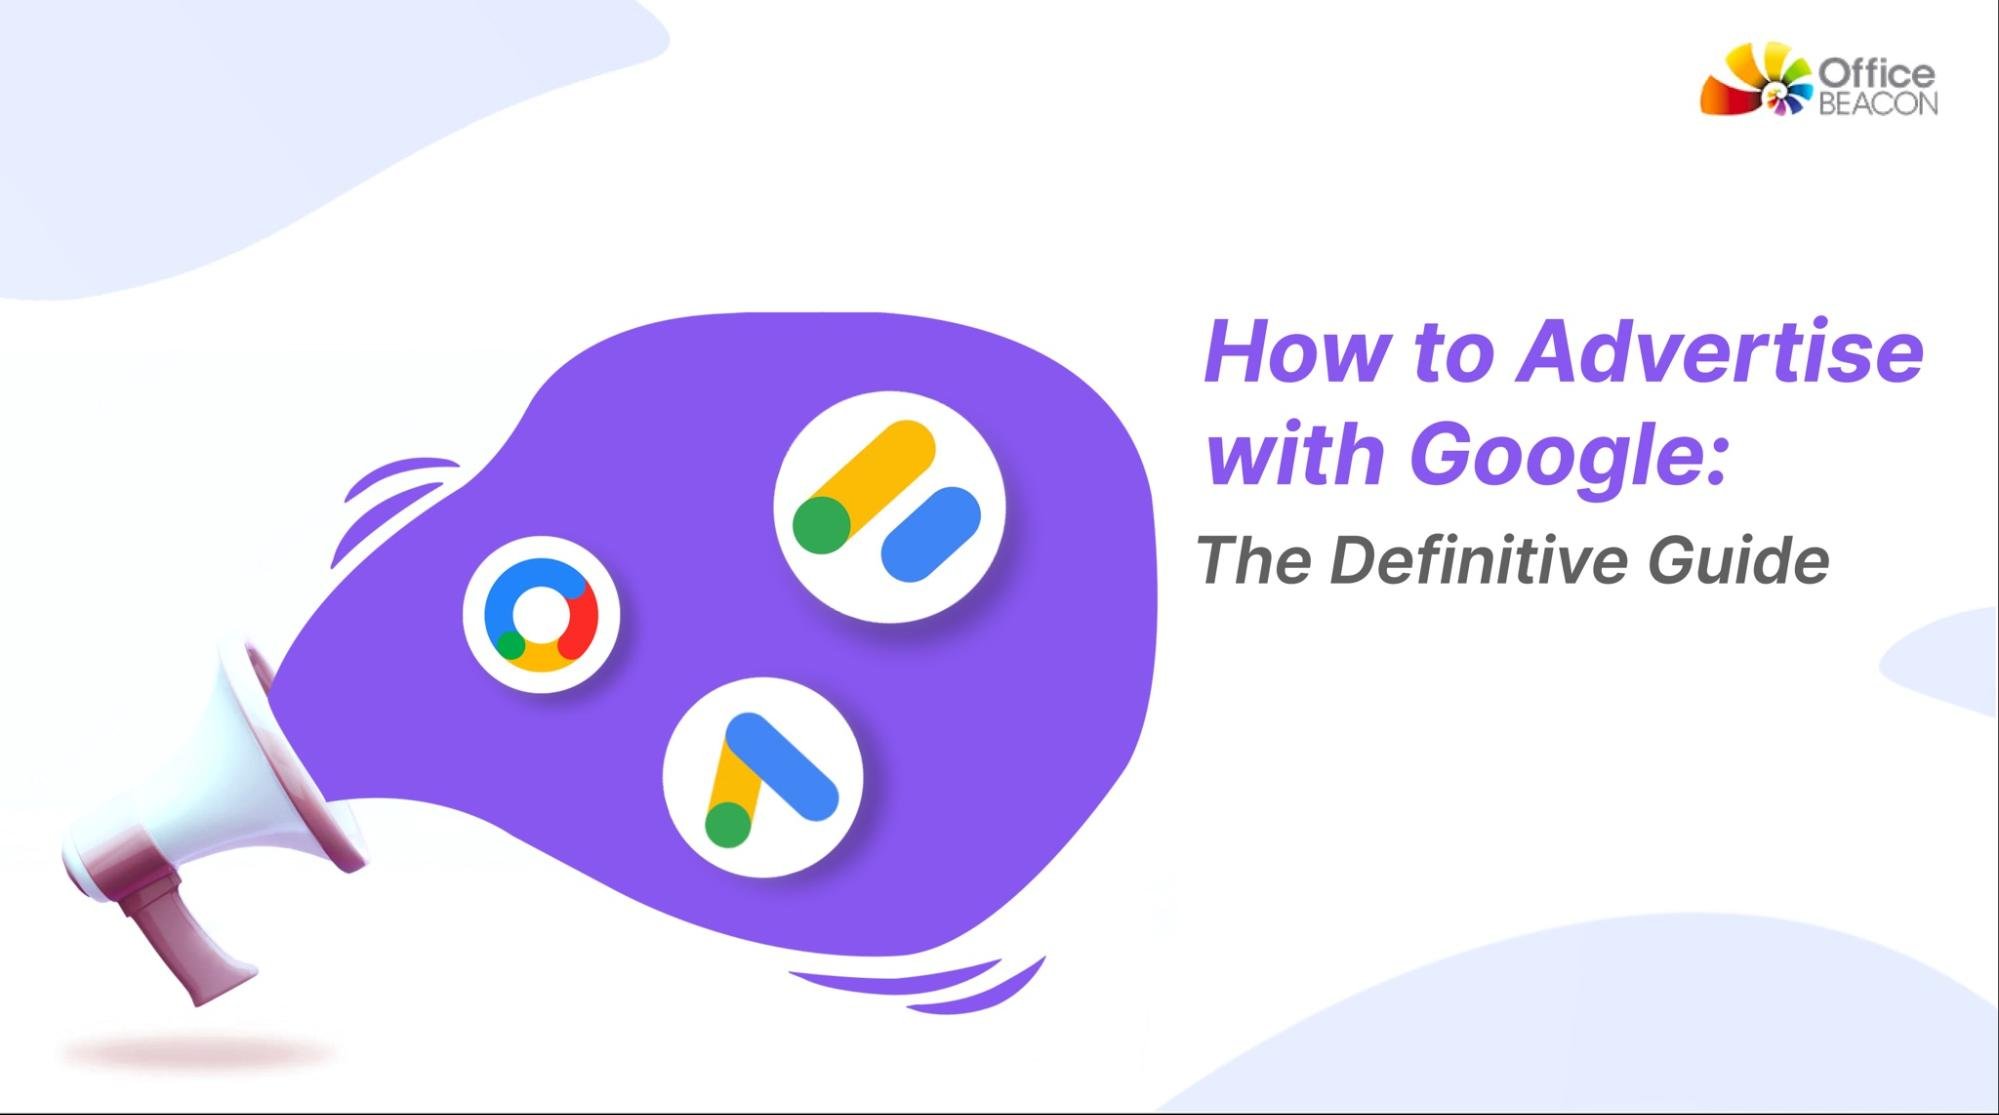 How to Advertise with Google: The Definitive Guide